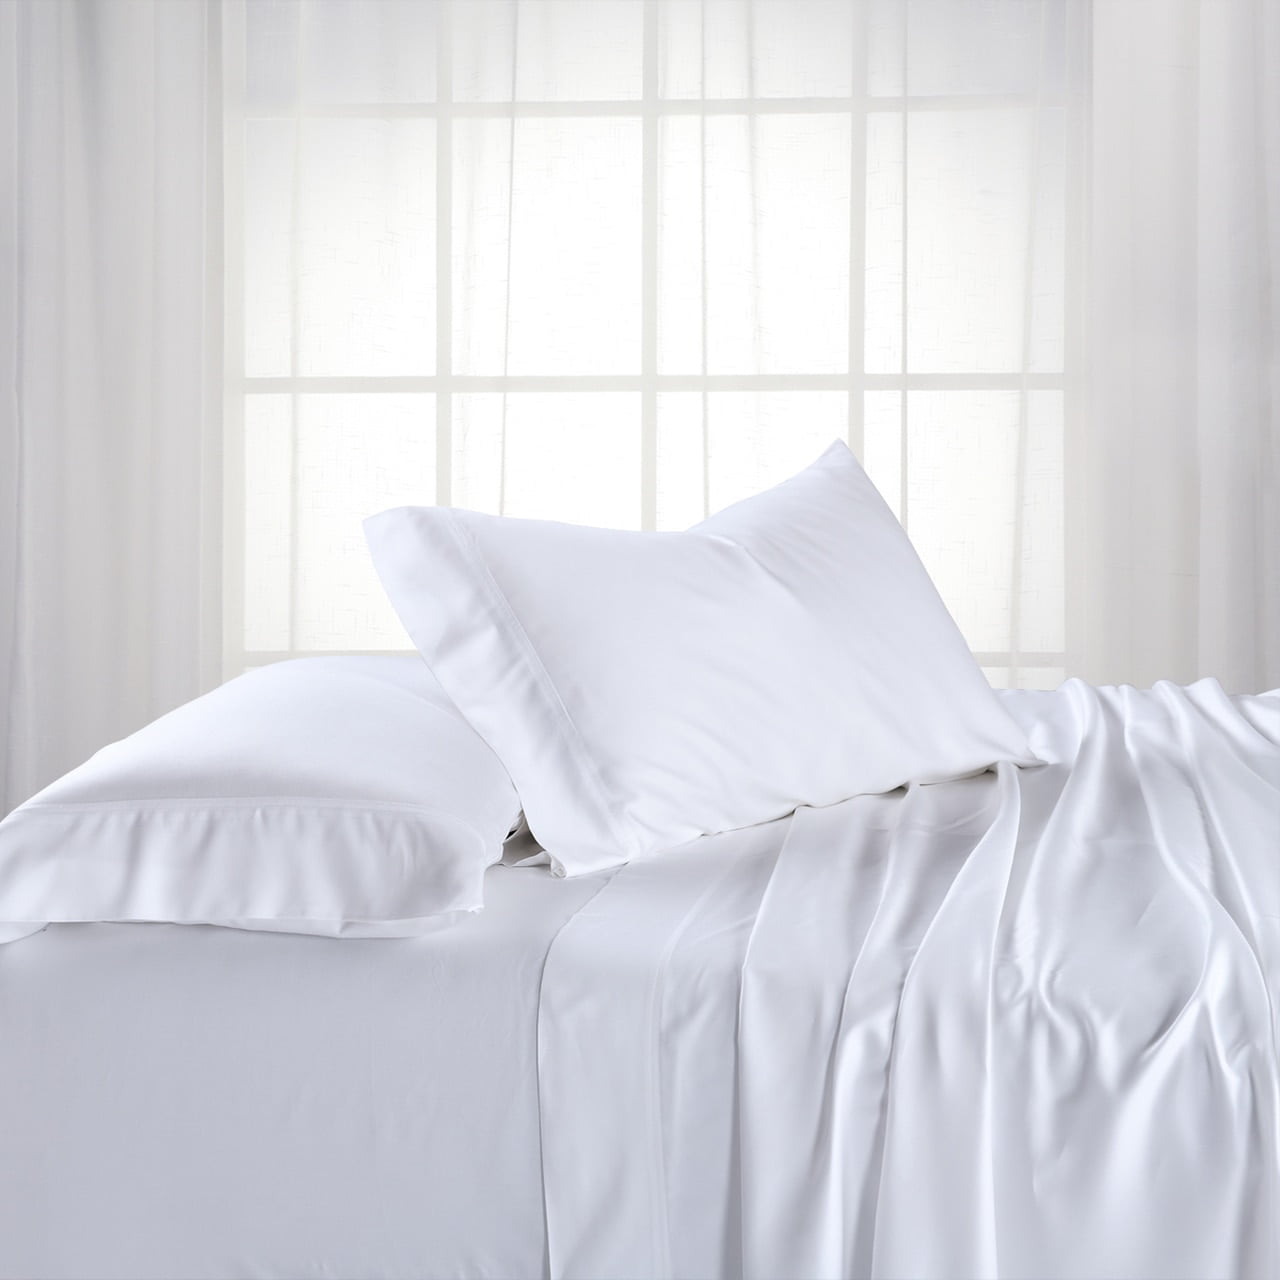 Details about   Fitted Sheet King Size 2 Piece 100% Cotton White T600 Thread Deep Pocket Soft 